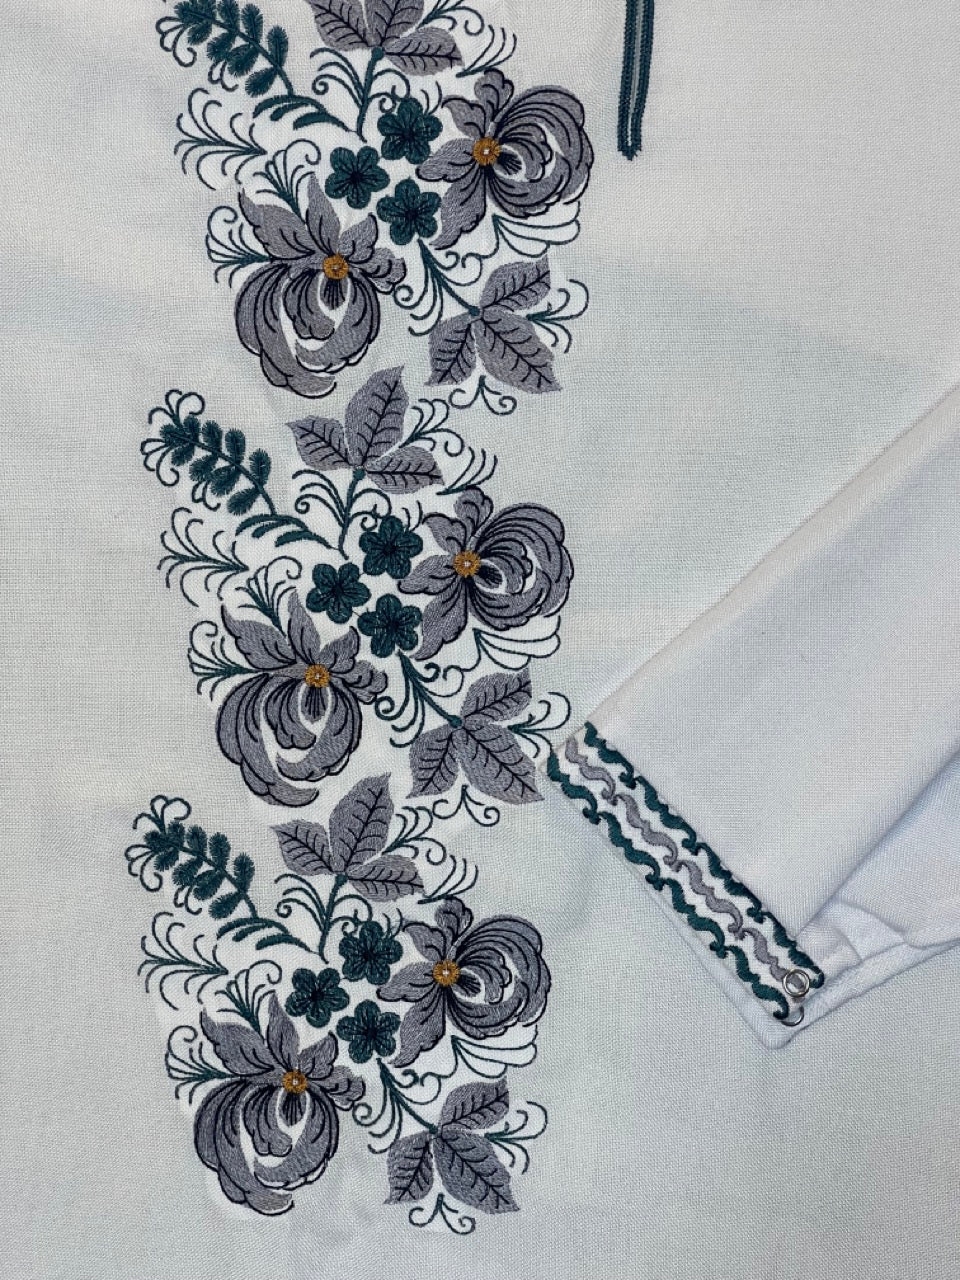 White Men's Shirt with Floral Embroidery on One Side